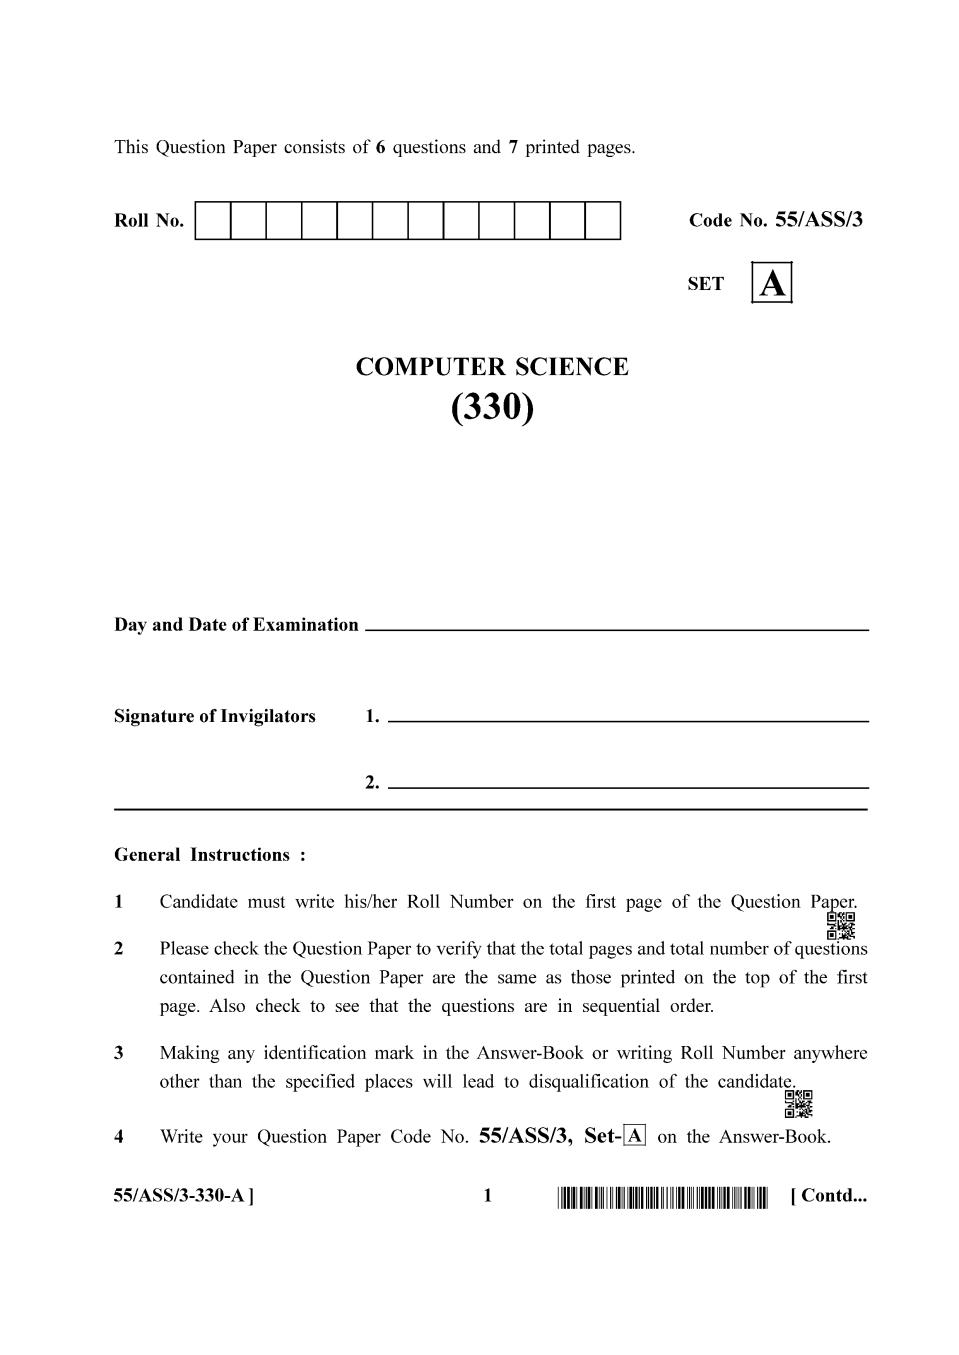 NIOS Class 12 Question Paper Oct 2017 - Computer Science - Page 1